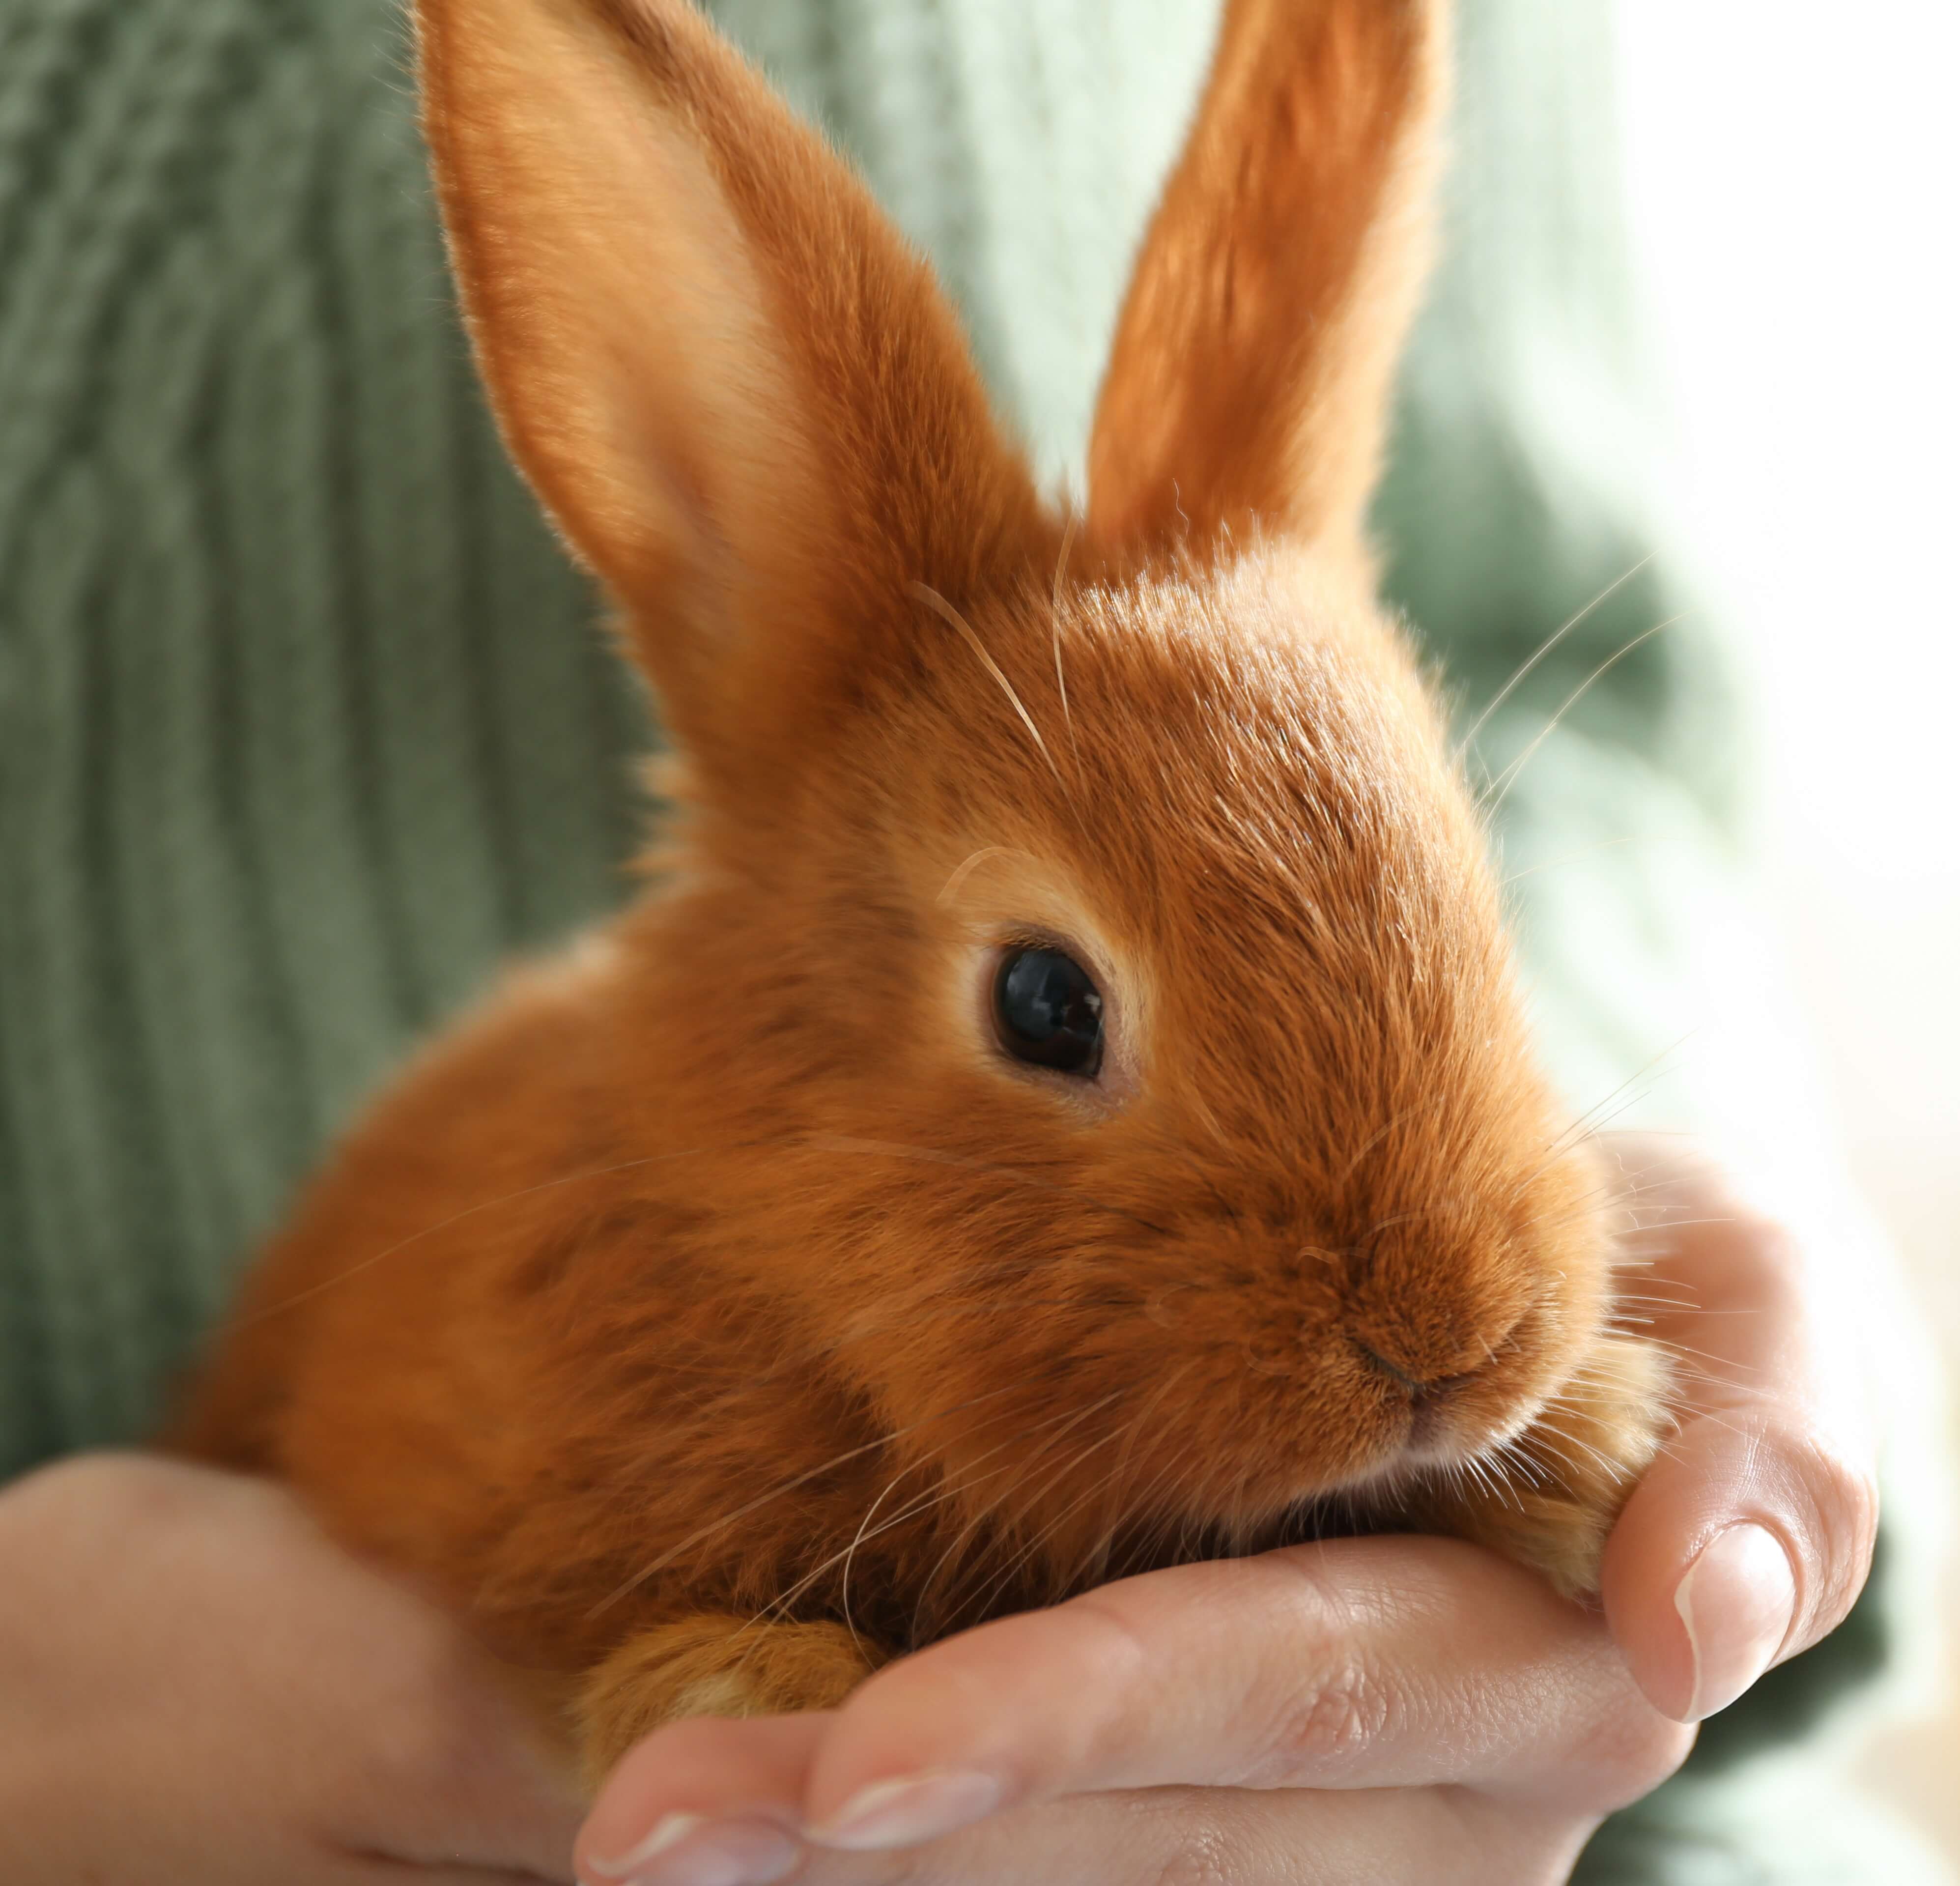 Handling rabbits is one of the most stressful things for new rabbit owners to learn.